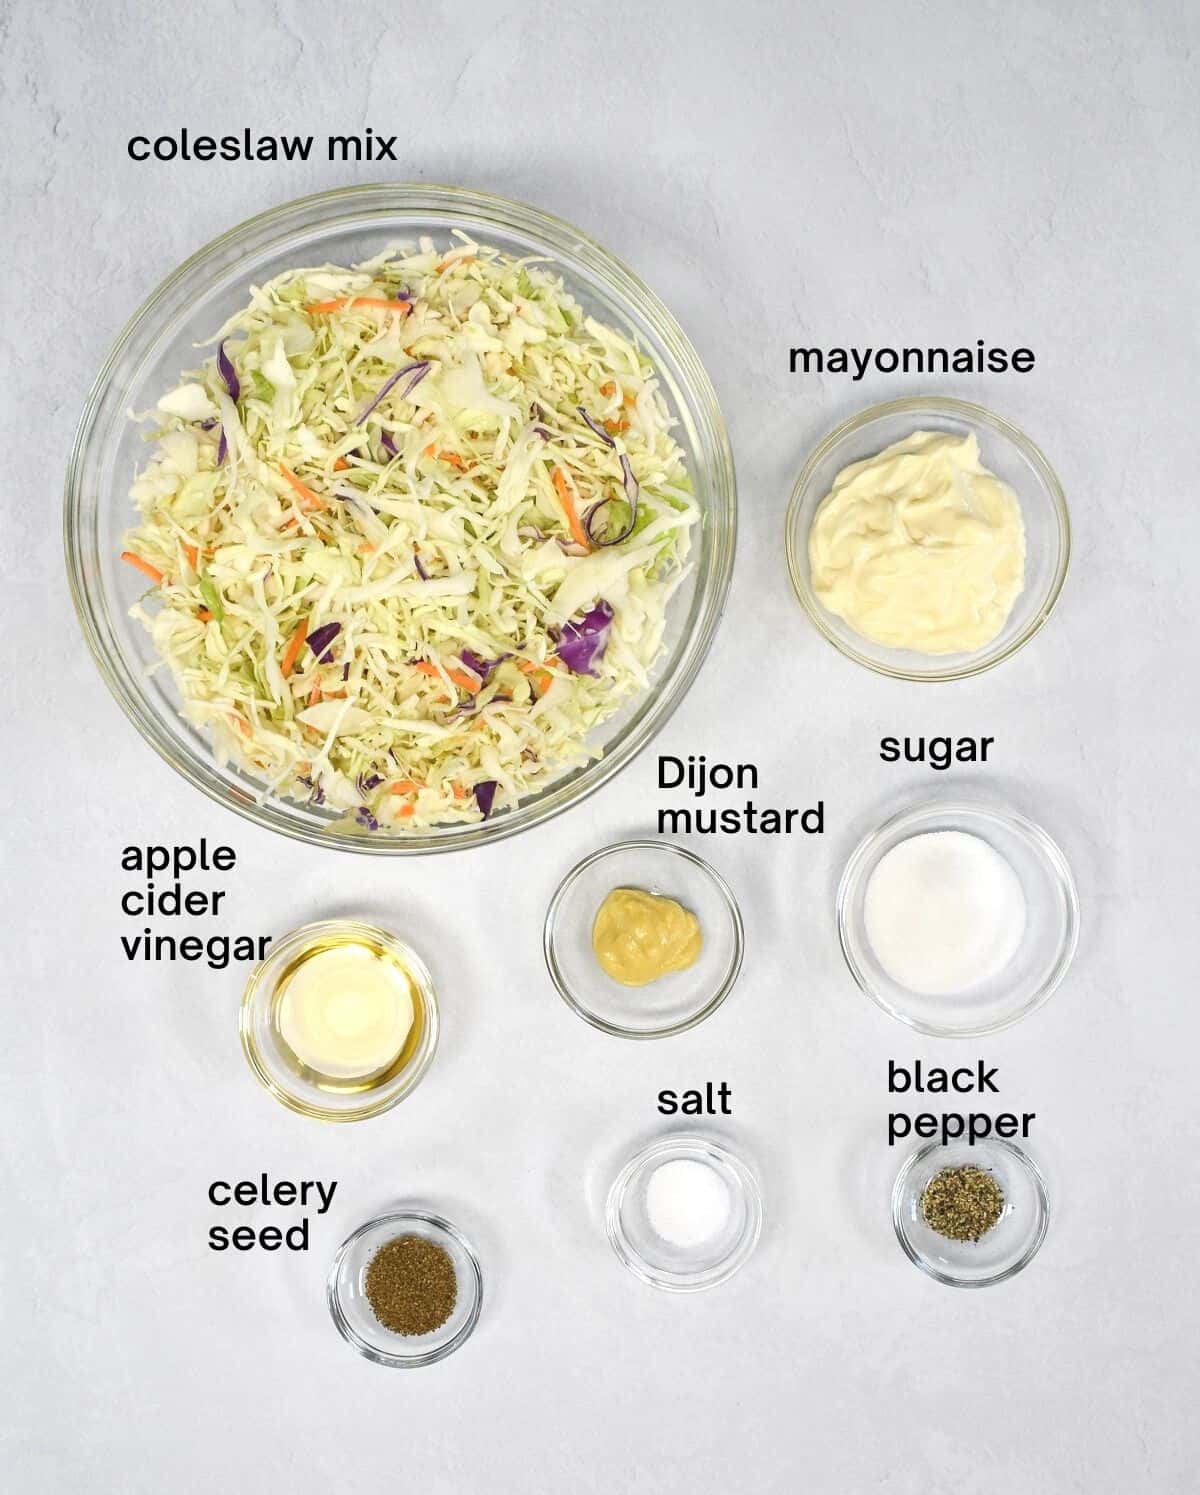 The ingredients for the easy coleslaw arranged in glass bowls on a white table.